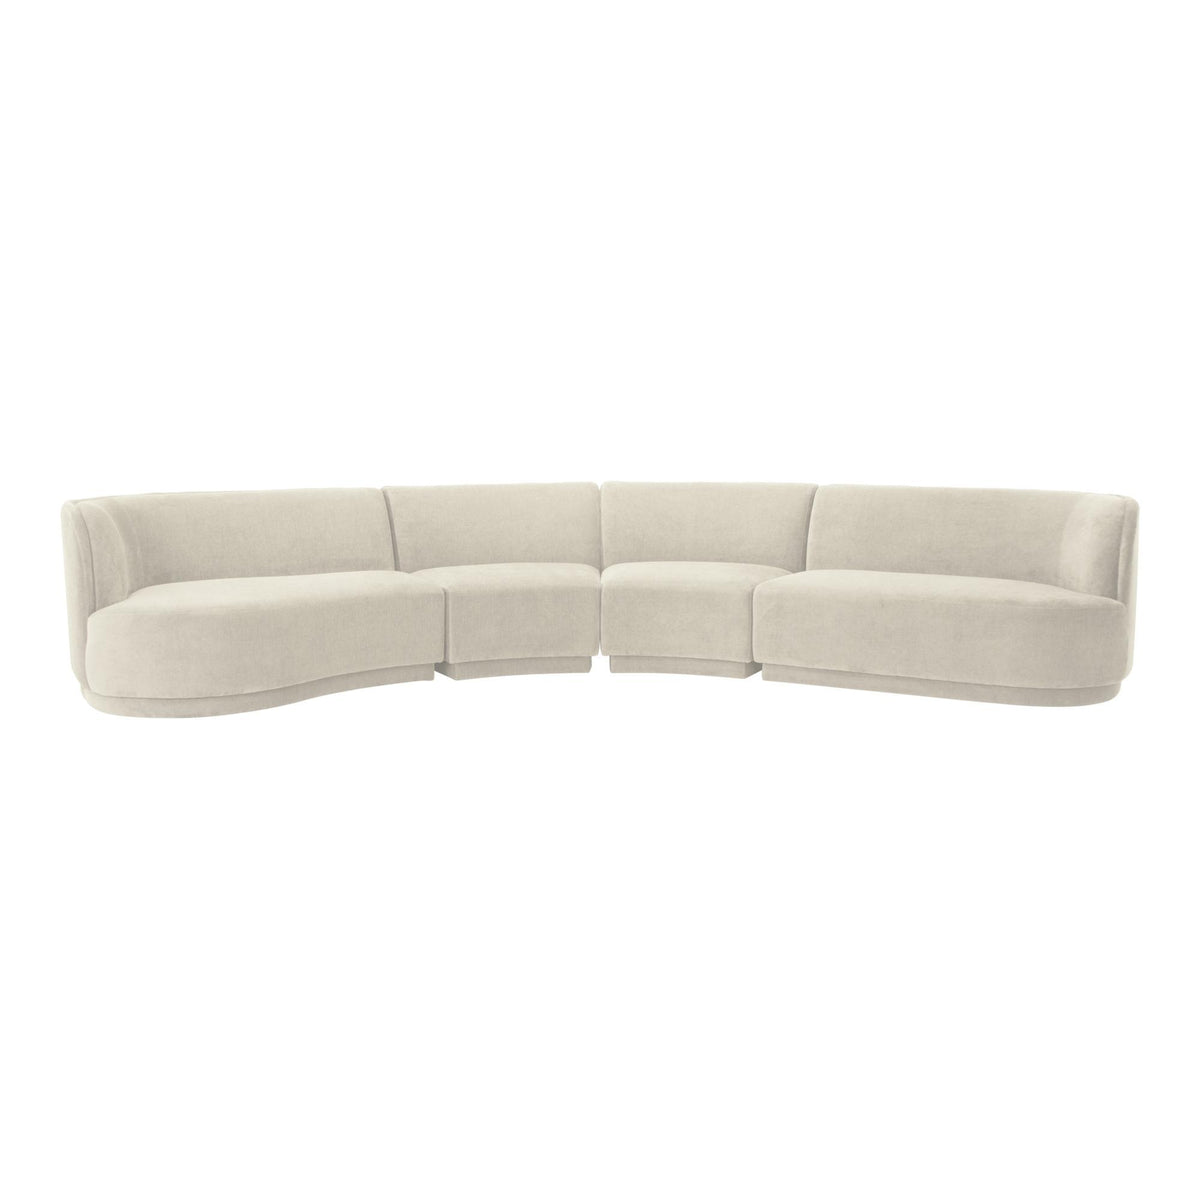 Moe's Home Collection Yoon Eclipse Modular Sectional Chaise Left Sweet Cream - JM-1024-05